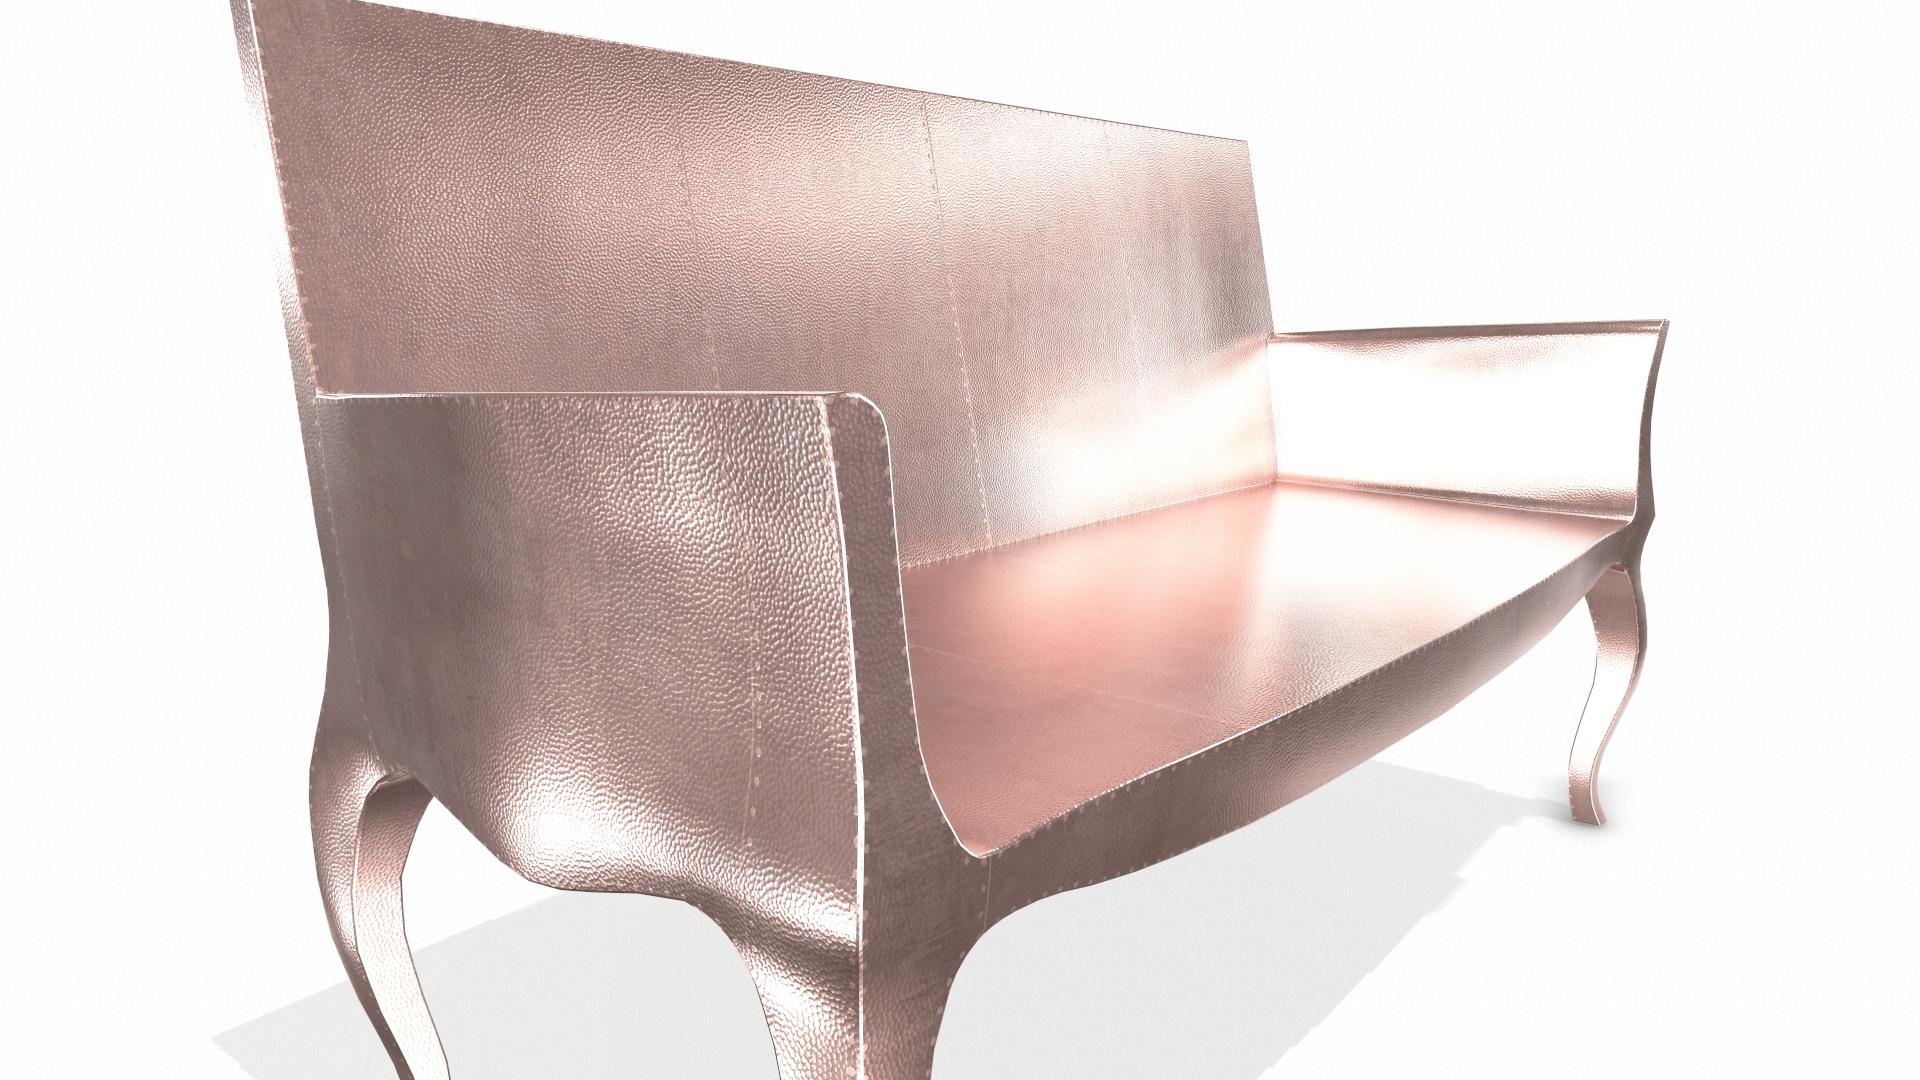 Metal Louise Settee Art Deco Loveseats in Mid. Hammered Copper by Paul Mathieu For Sale